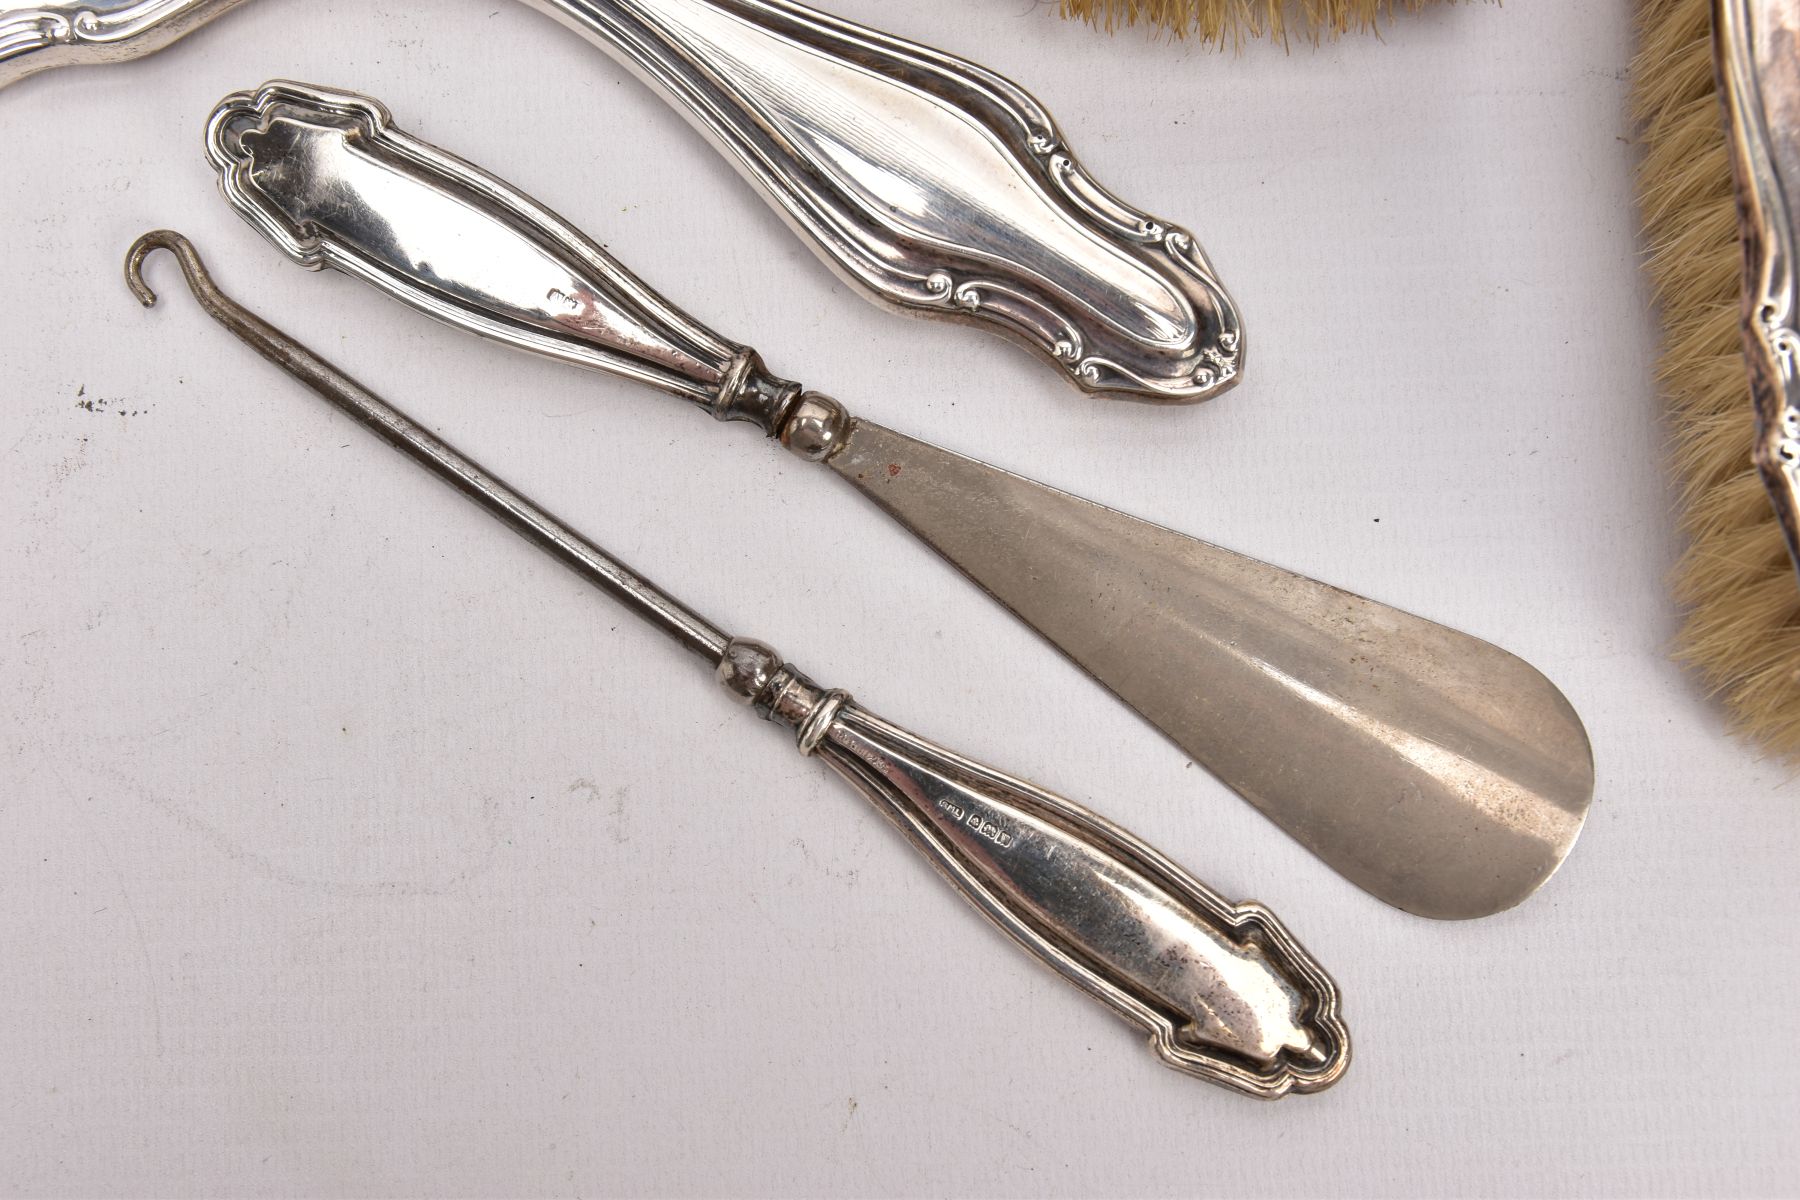 A THREE-PIECE SILVER VANITY SET A BUTTON HOOK AND A SHOEHORN, the vanity set comprising of a - Image 6 of 7